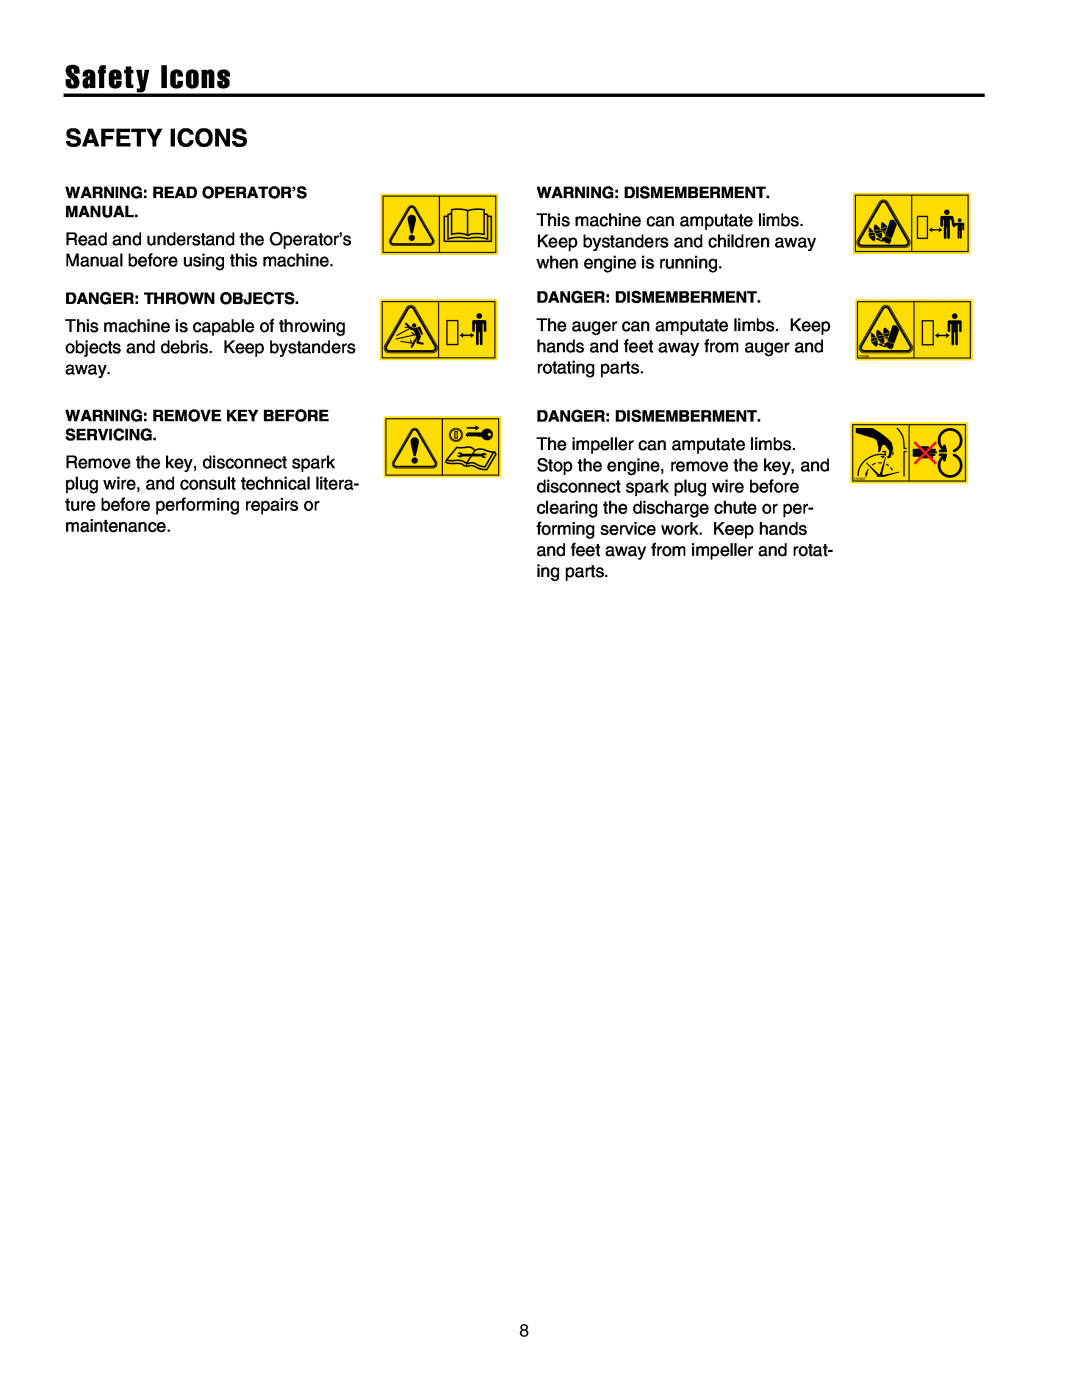 Snapper 8526, 9528, 10530, 11532 manual Safety Icons 